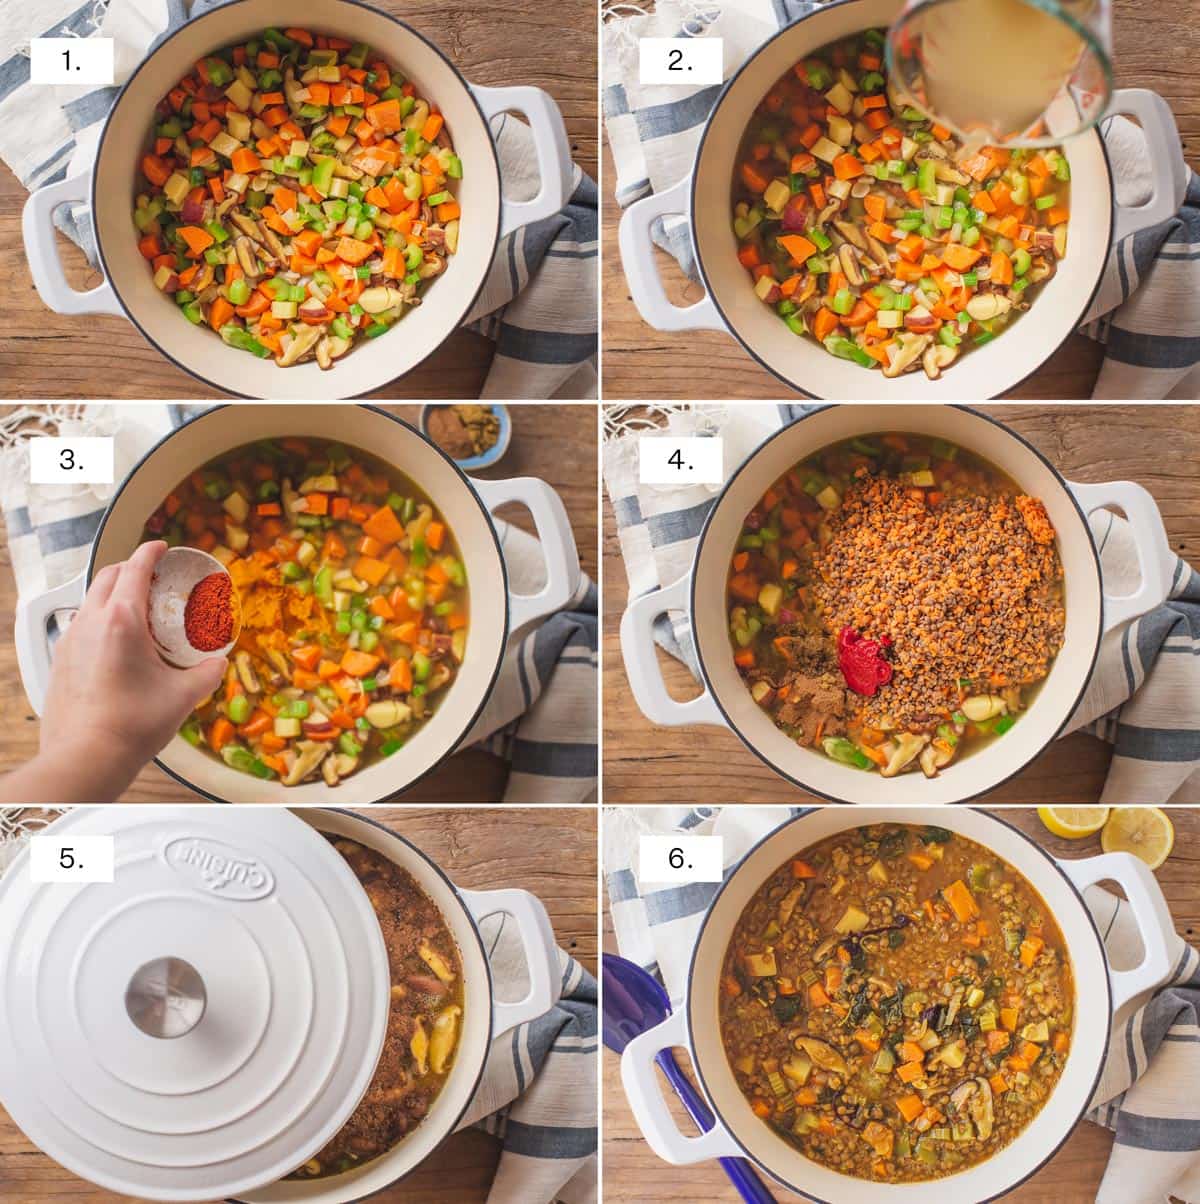 Step by step collage showing how to make vegetable lentil soup